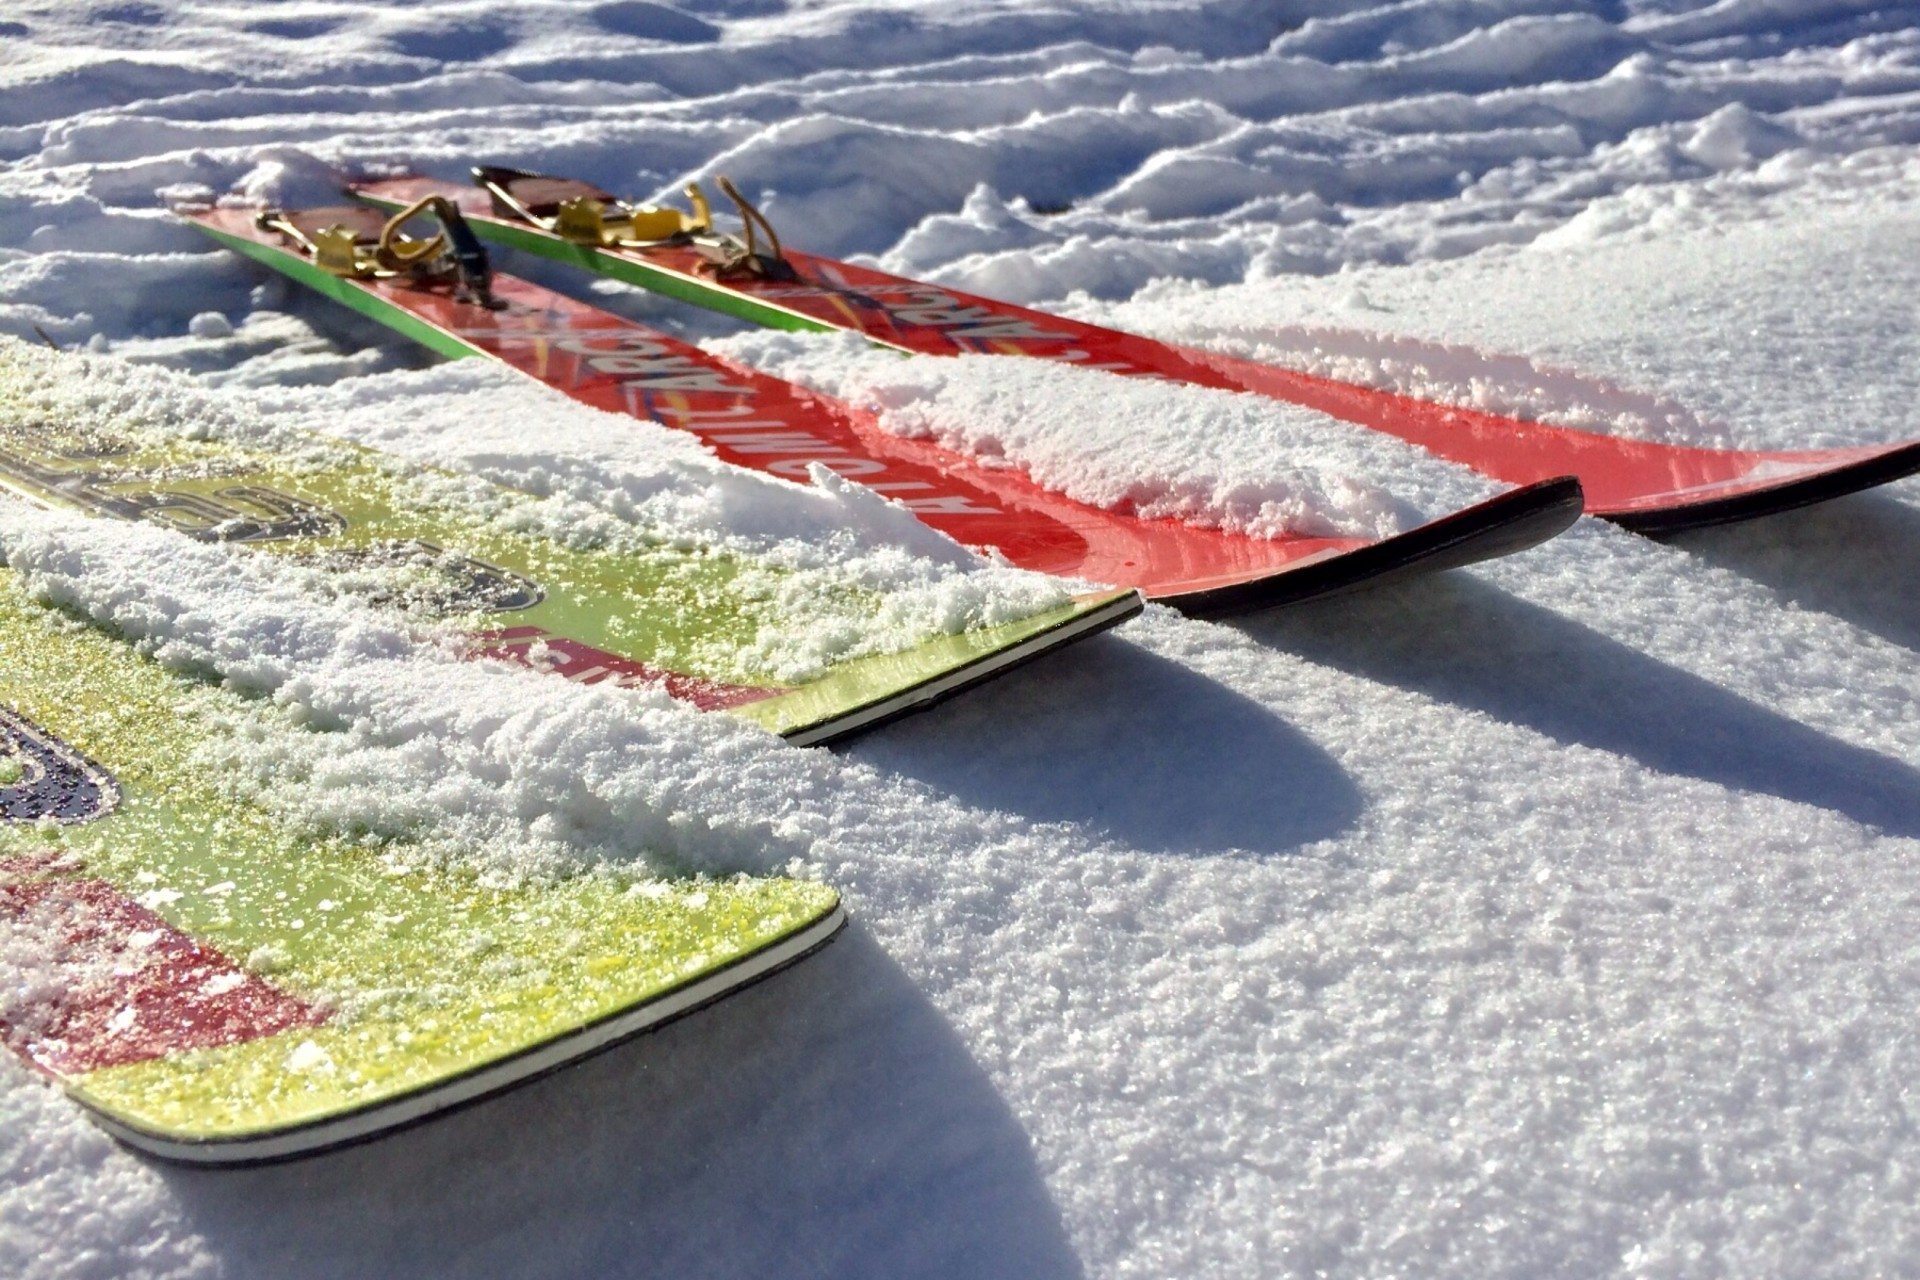 It is important to choose the right ski shape for your style of skiing.